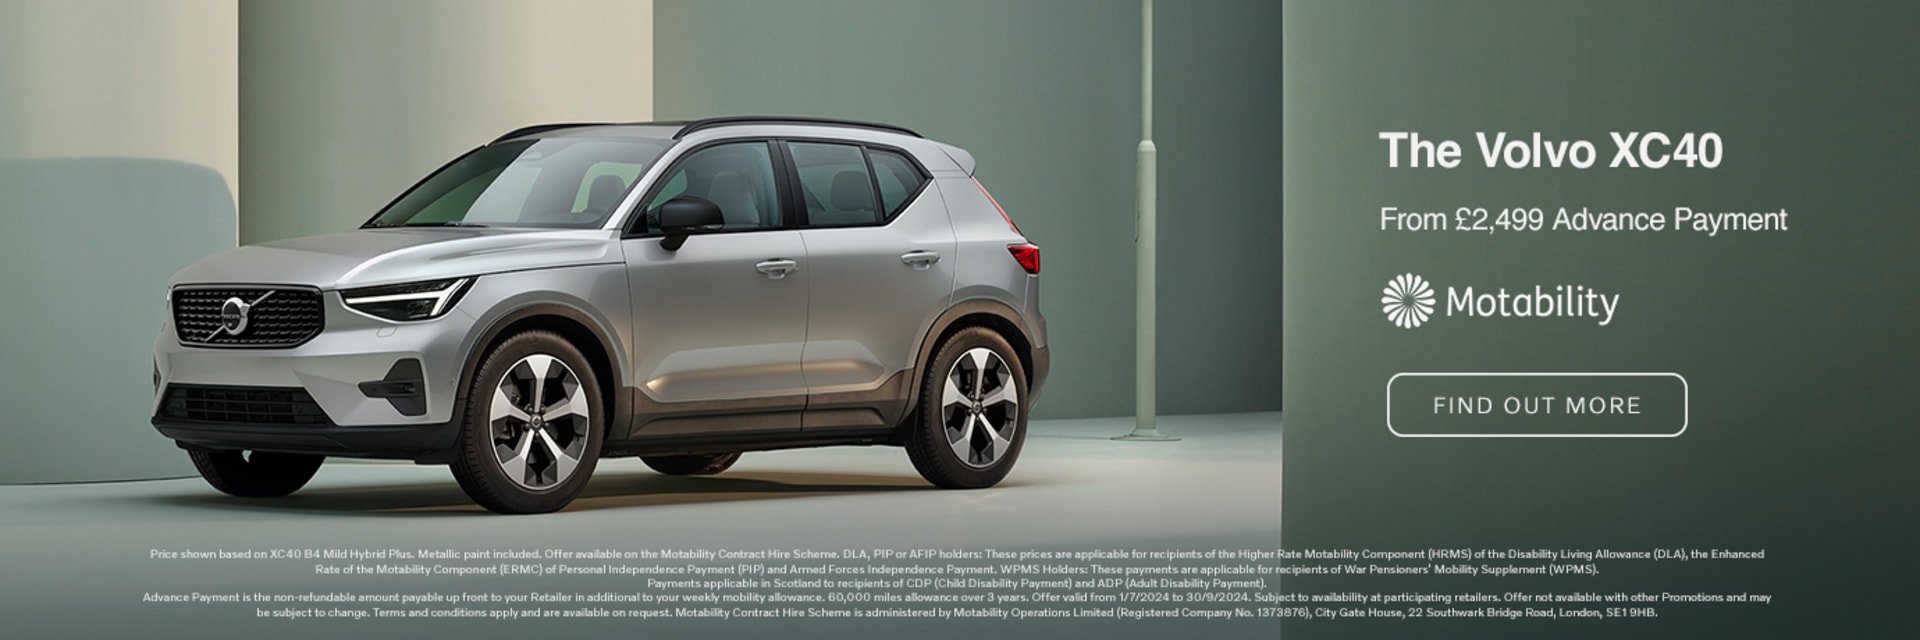 The Volvo XC40 From £2,499 Advance Payment on the Motability Scheme